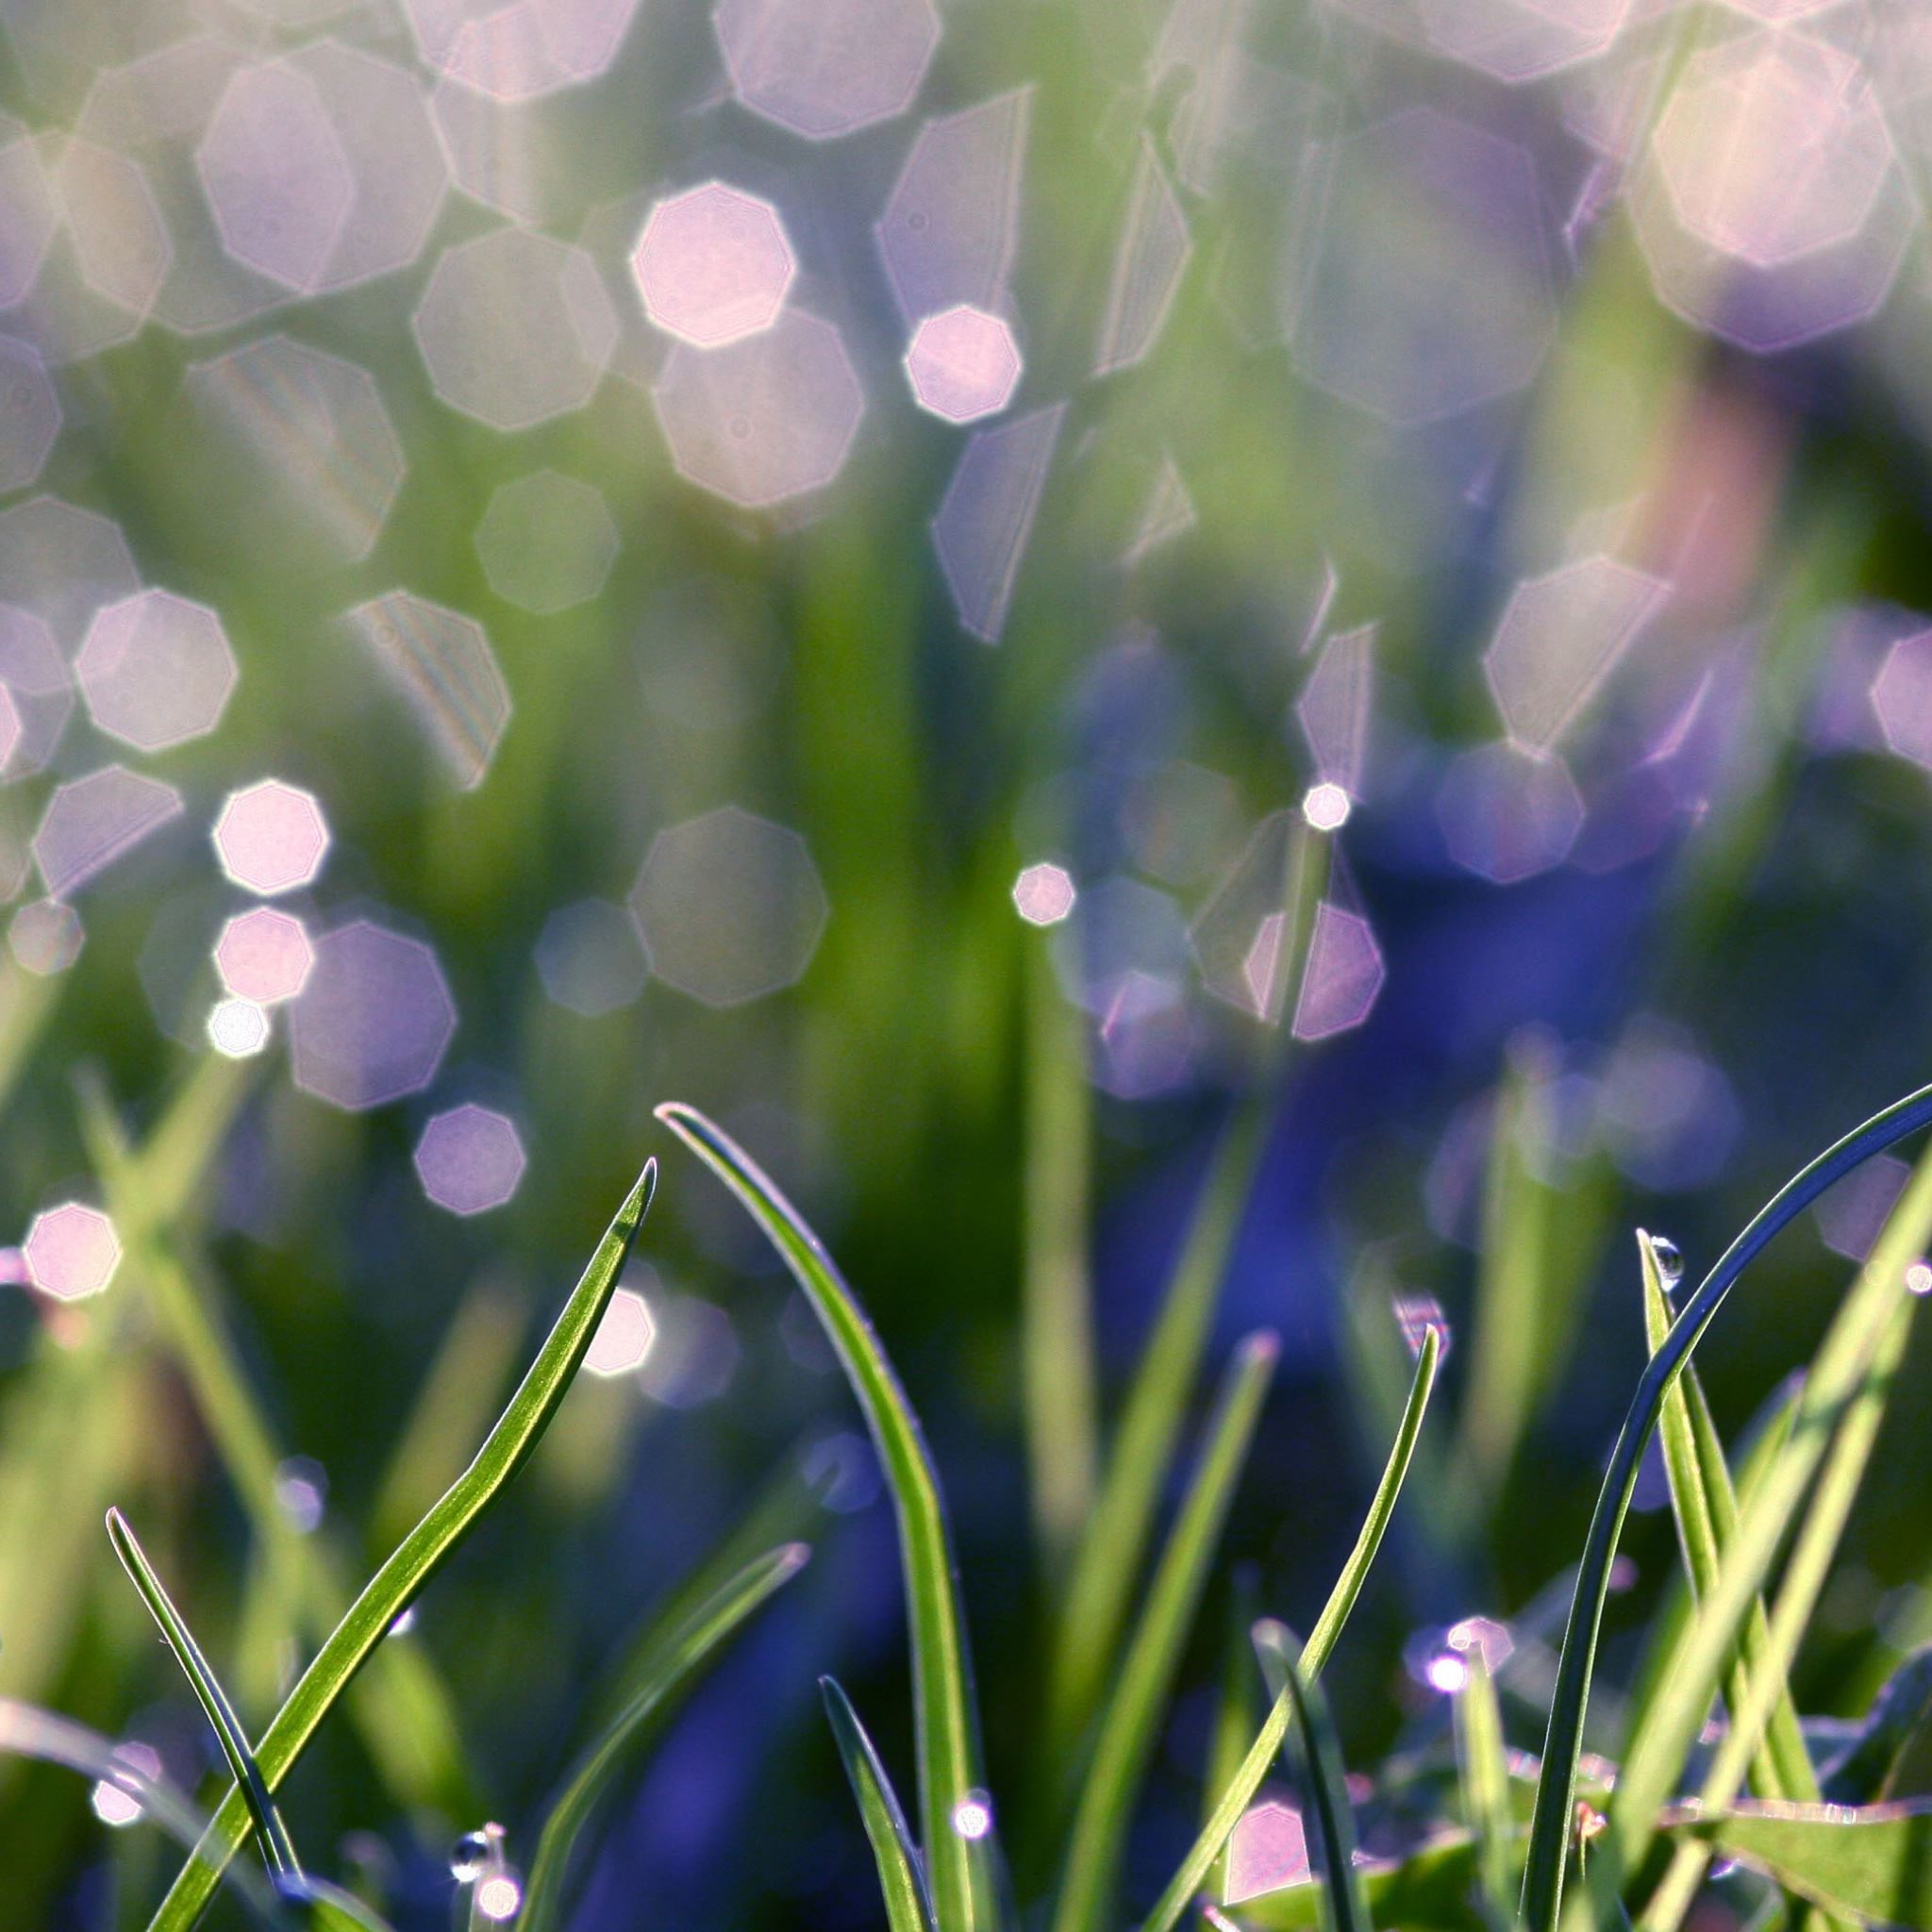 Grass With Morning Dew iPad Air wallpaper 